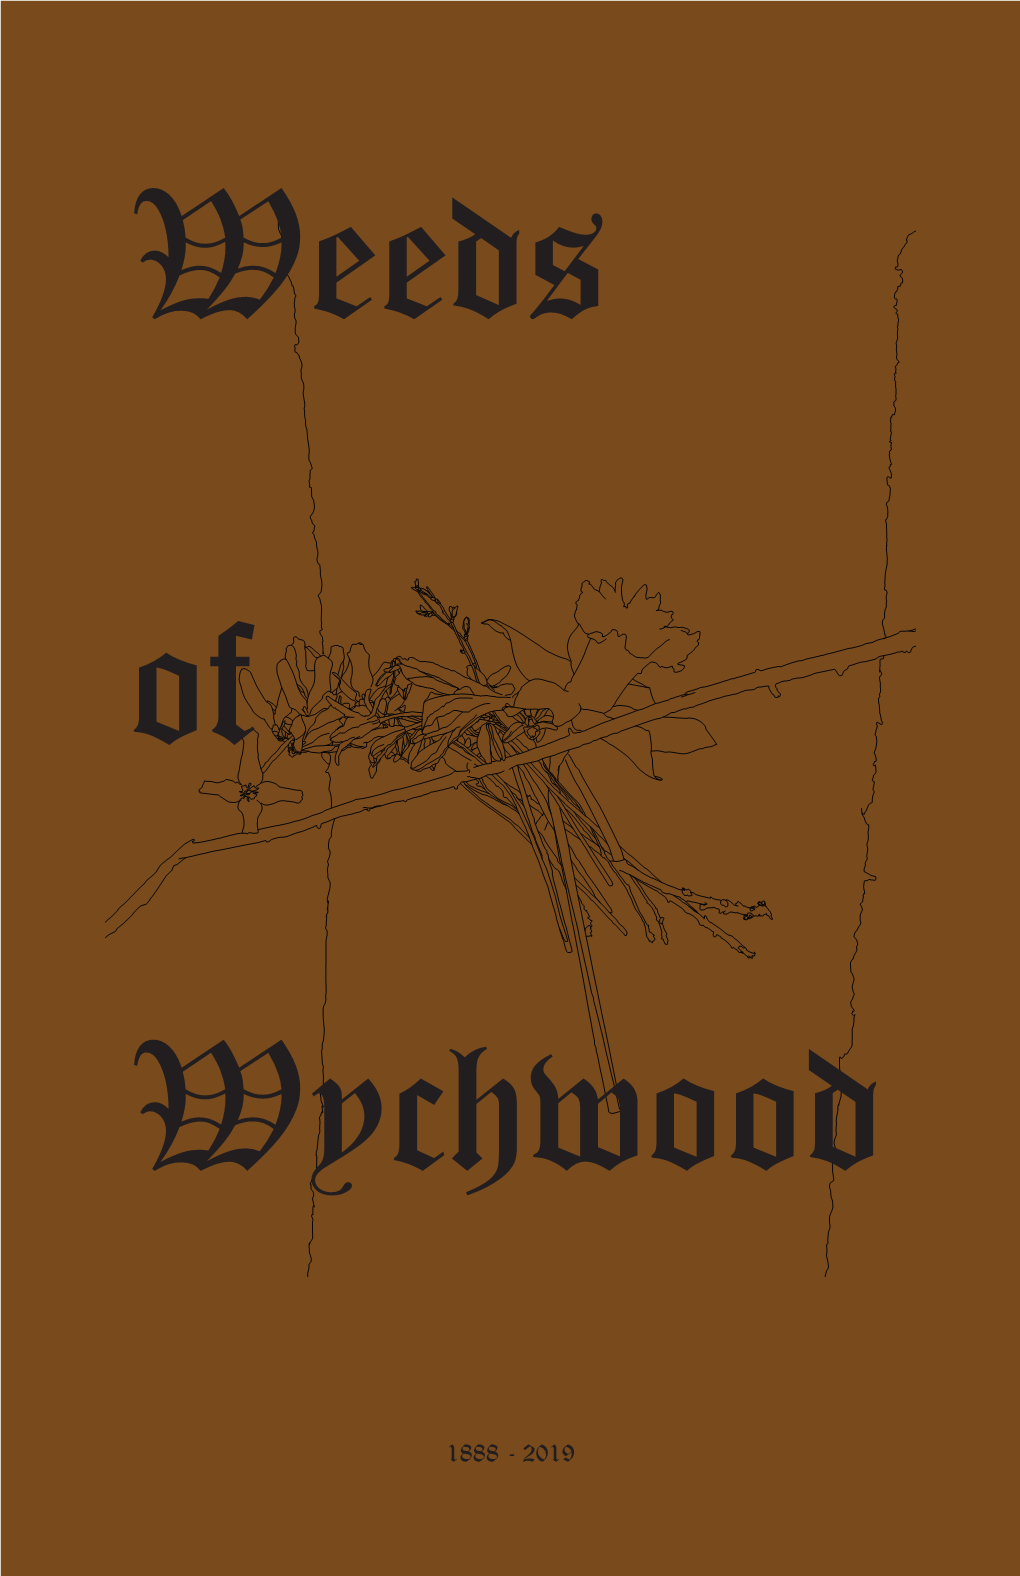 Weeds of Wychwood 1888-2019 Distributed by CER: Centre for Experiential Research, 2019